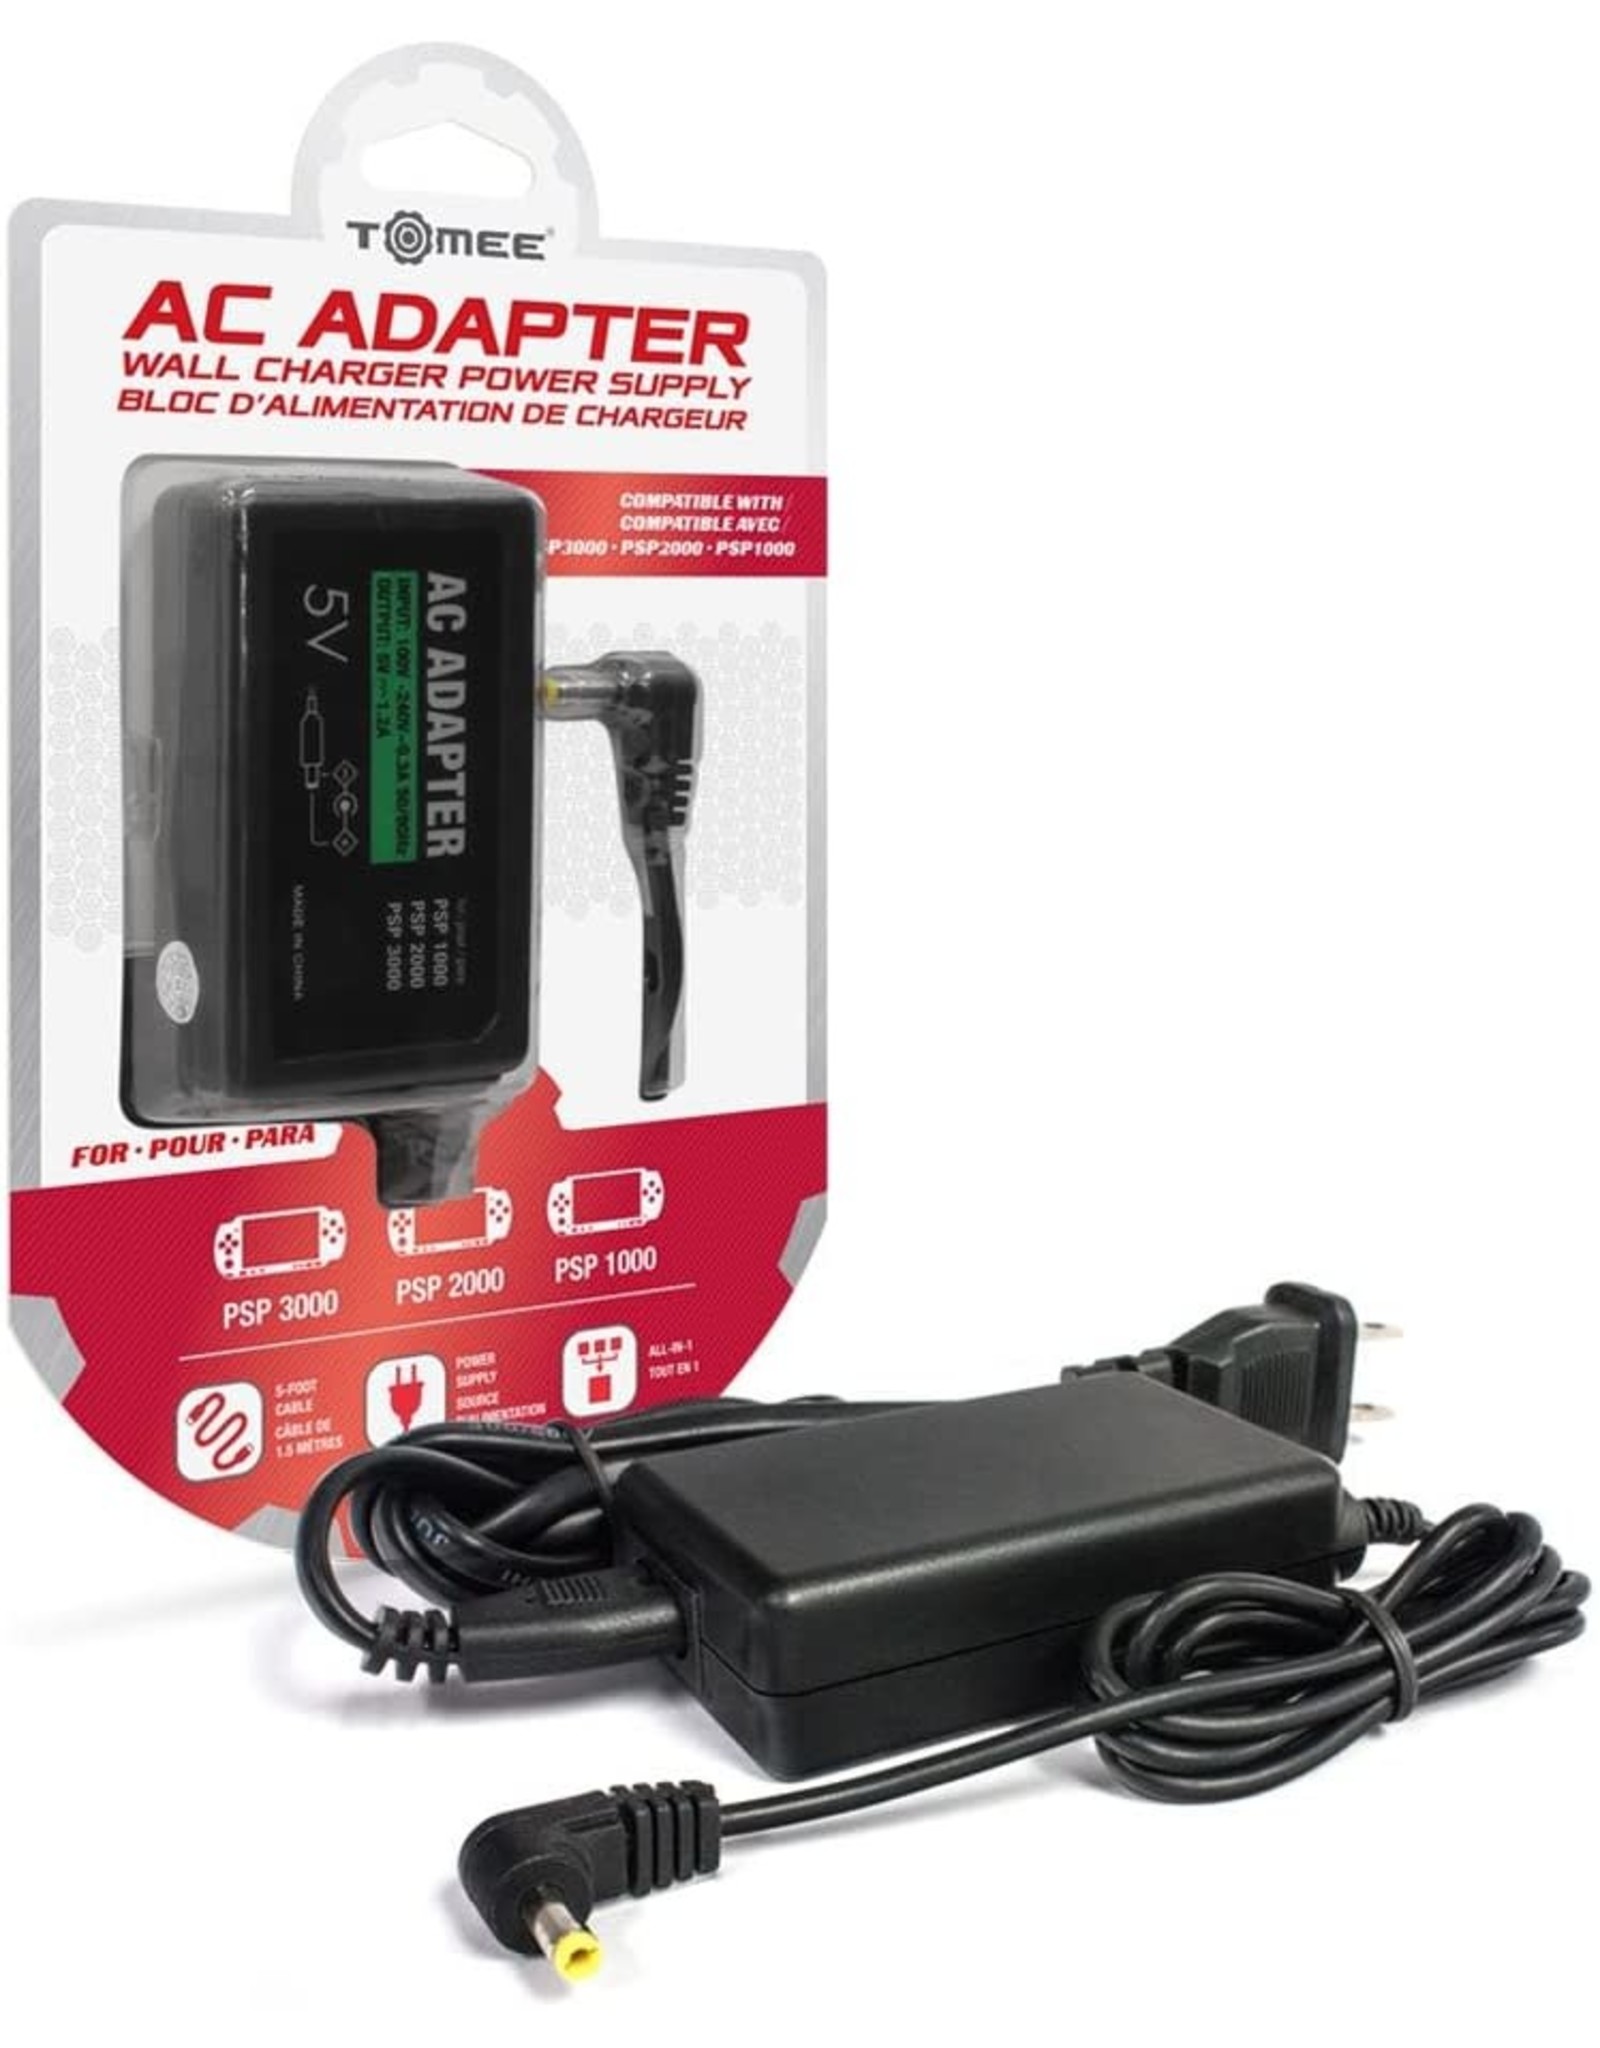 PSP PSP AC Power Adapter 1000 / 2000 / 3000 (Tomee)